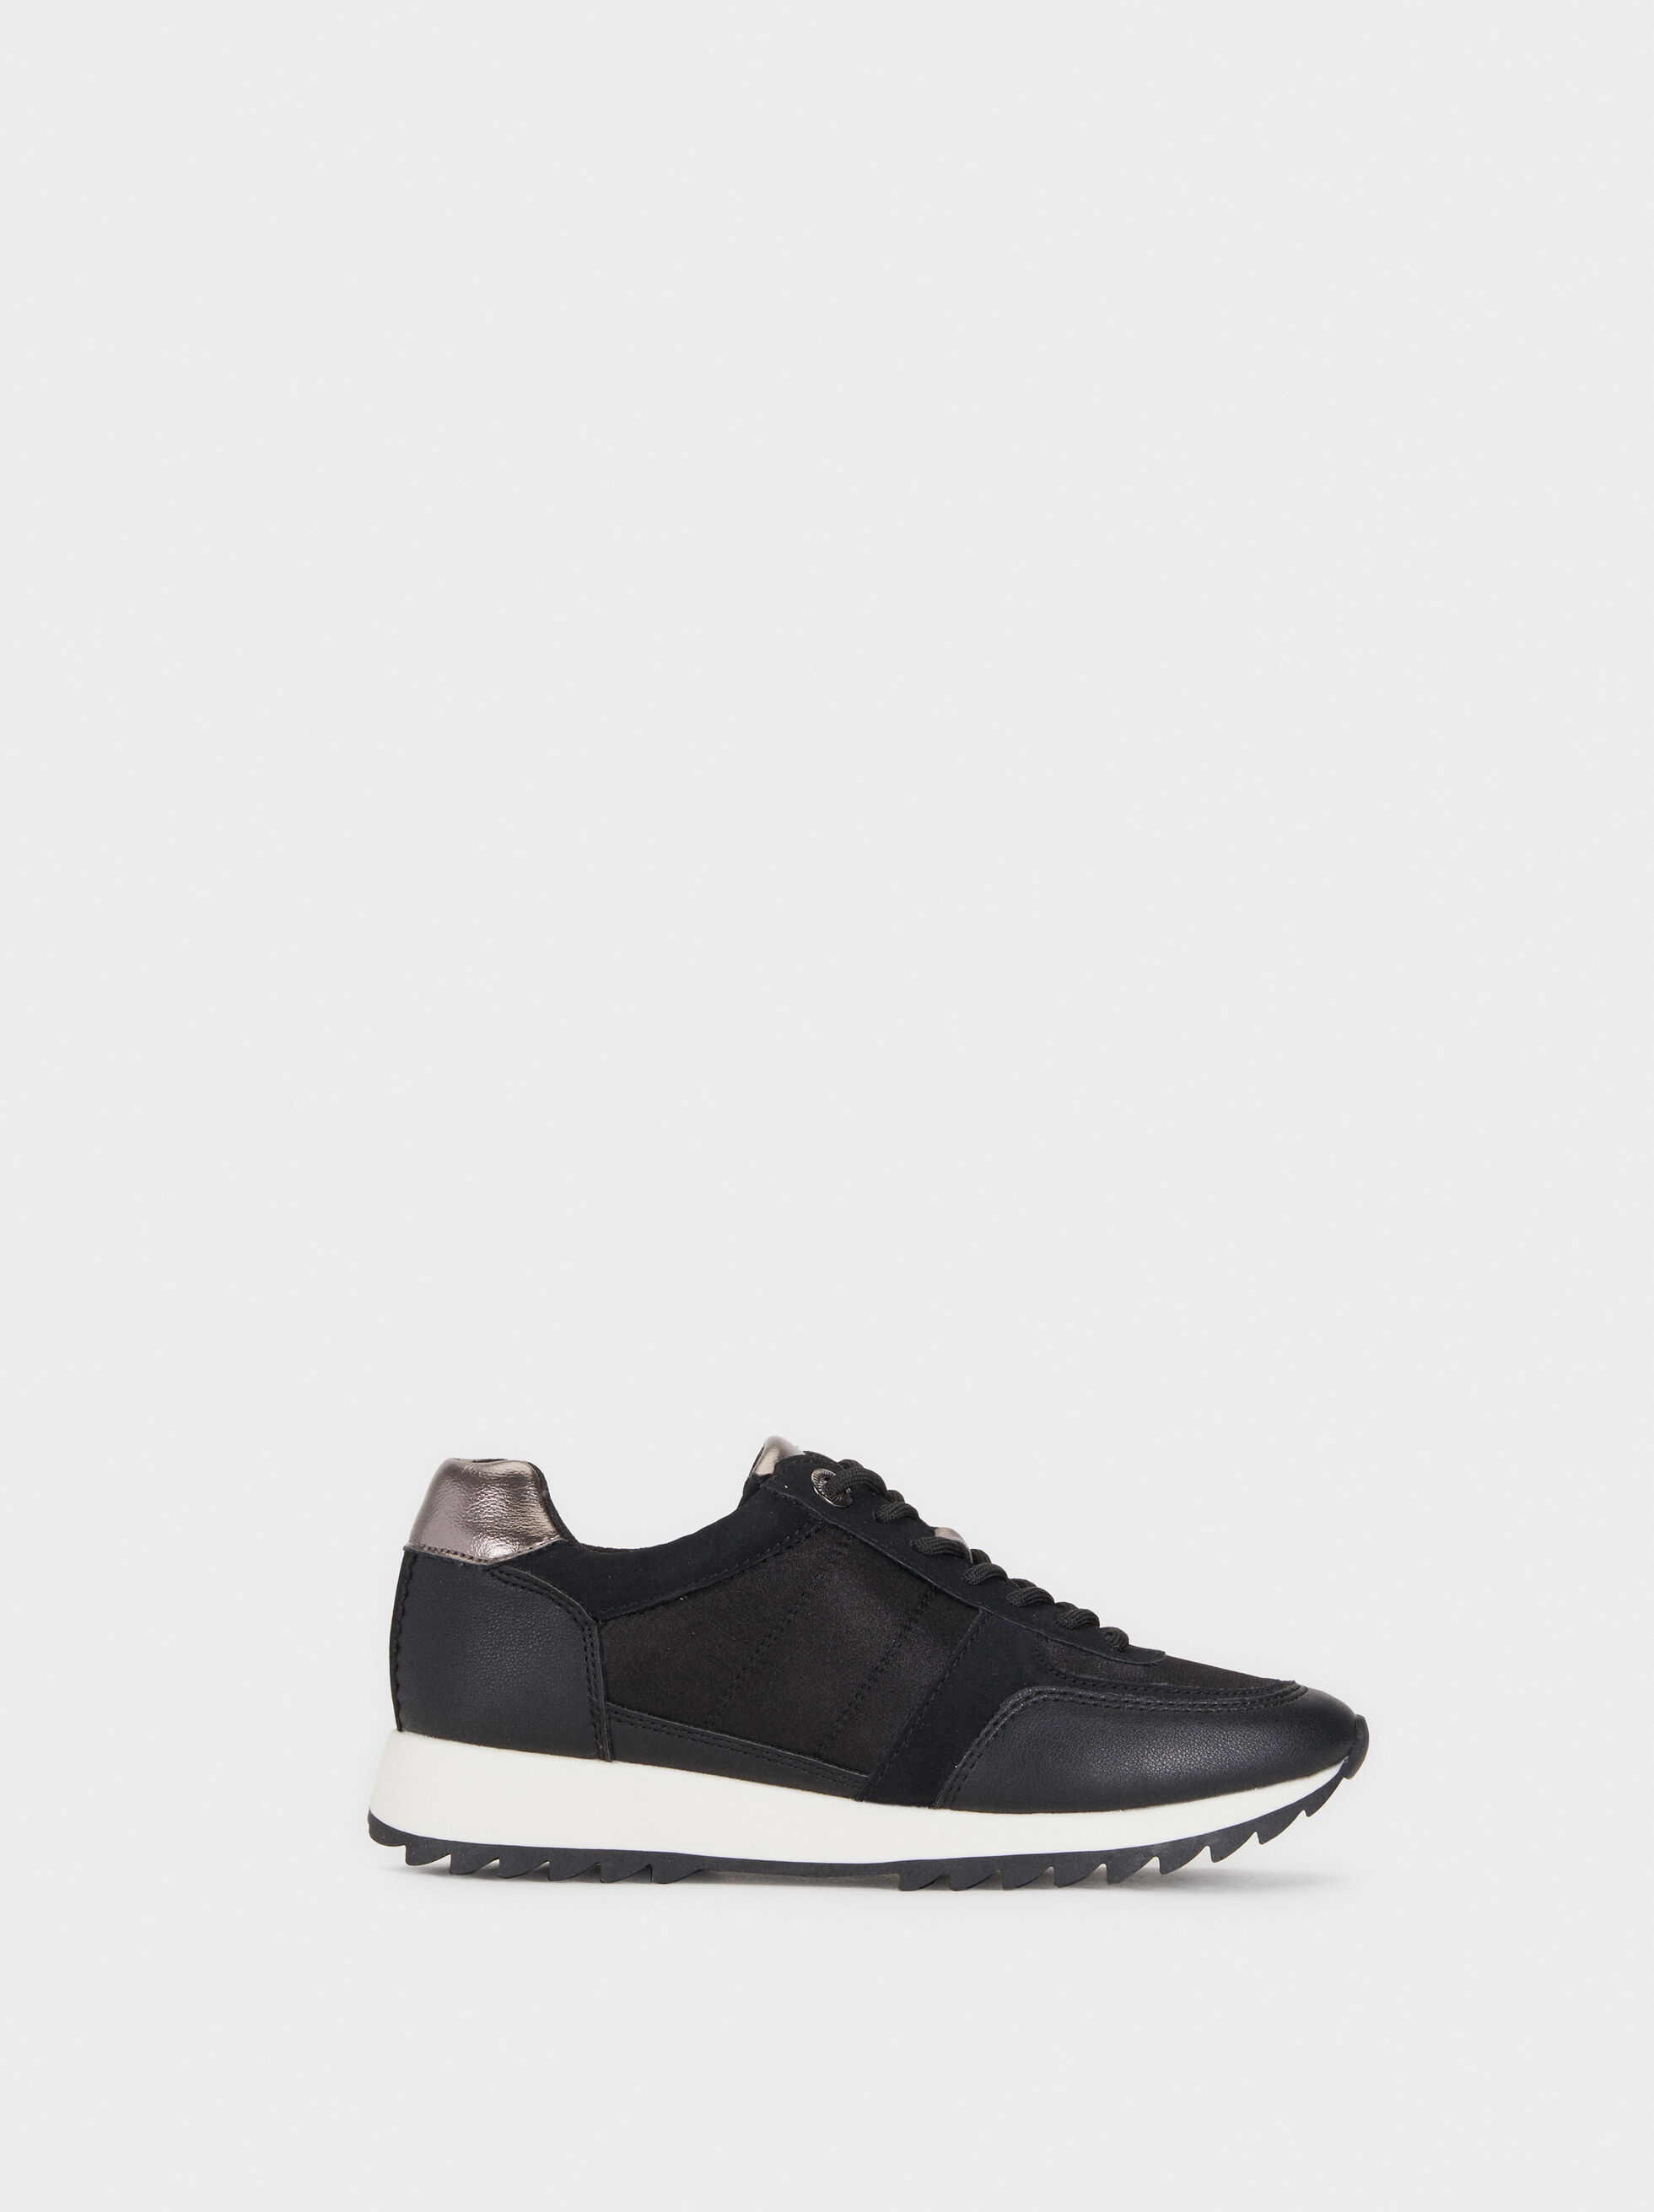 black trainers with white sole womens